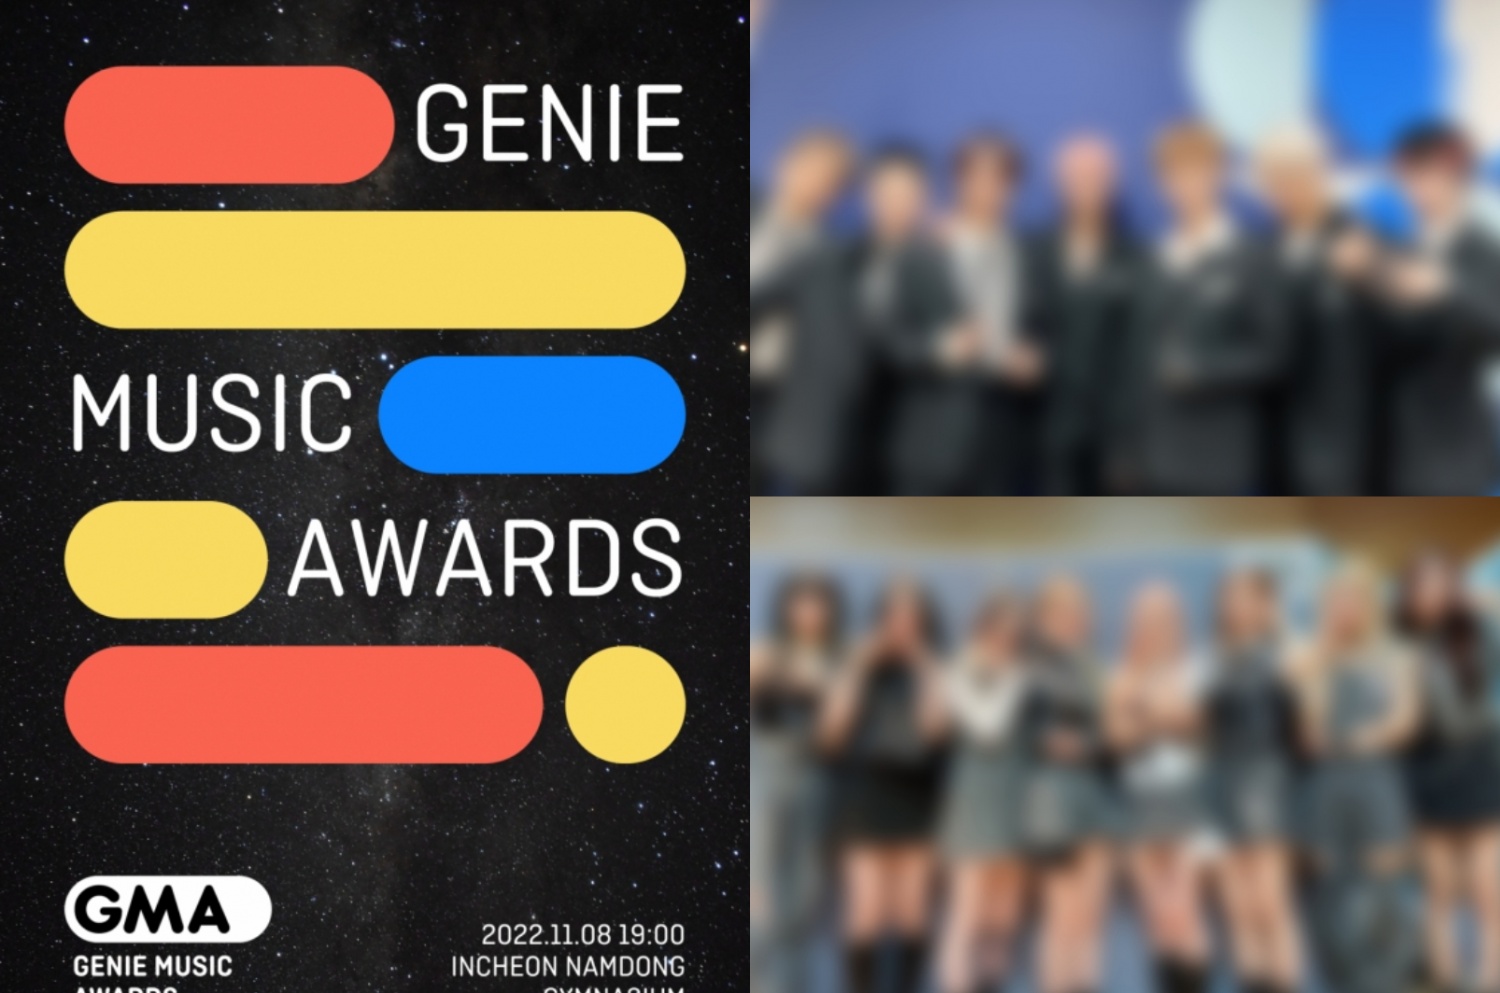 The 2022 Genie Music Awards reveals the final roster of artists